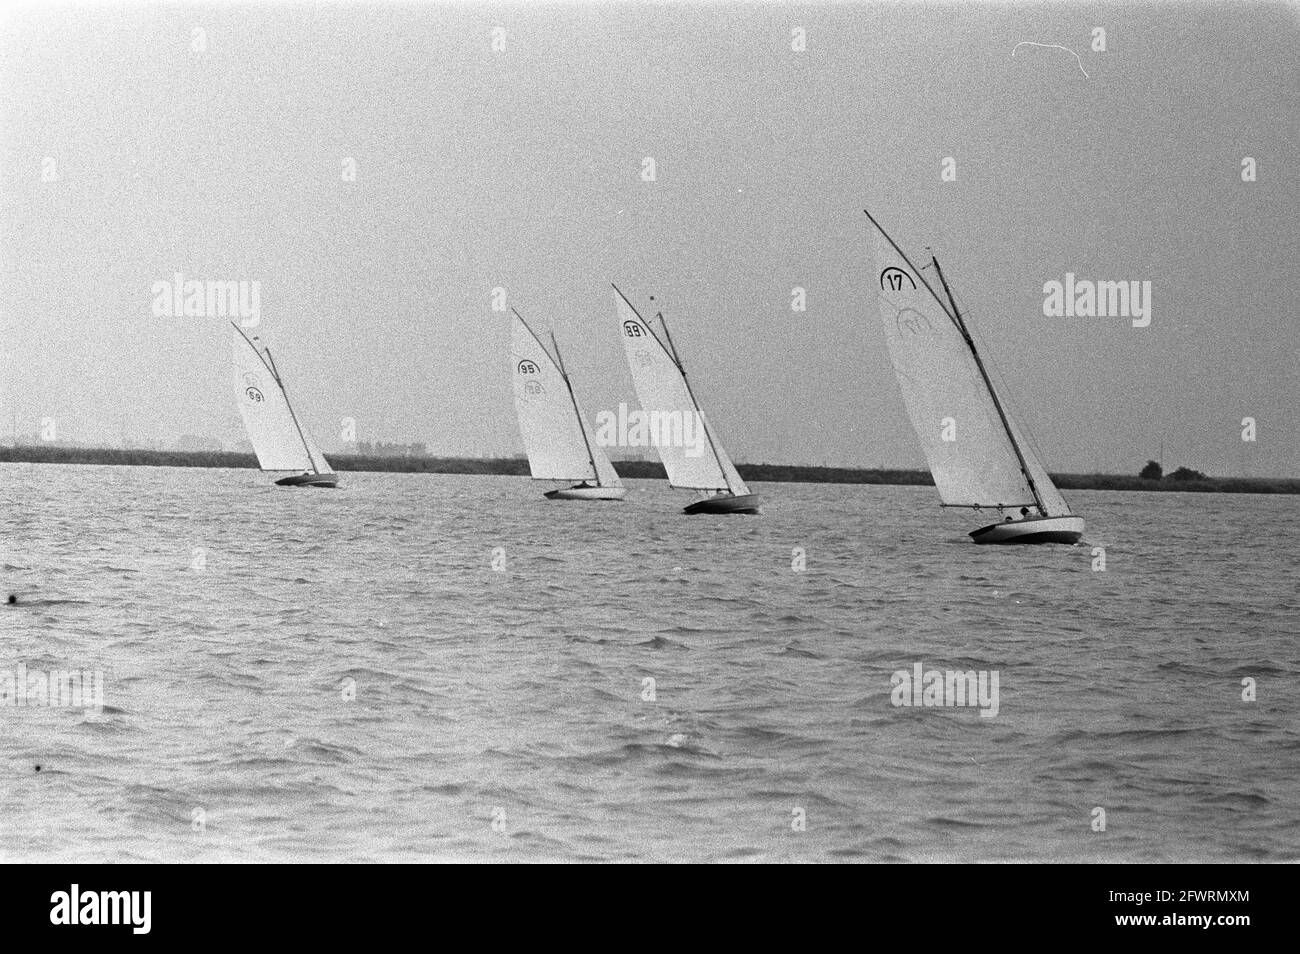 Dutch Championships Rainbow Class sailing on Alkmaardermeer, July 19 1970, CHAMPIONSHIPS, SAGES, The Netherlands, 20th century press agency photo, news to remember, documentary, historic photography 1945-1990, visual stories, human history of the Twentieth Century, capturing moments in time Stock Photo